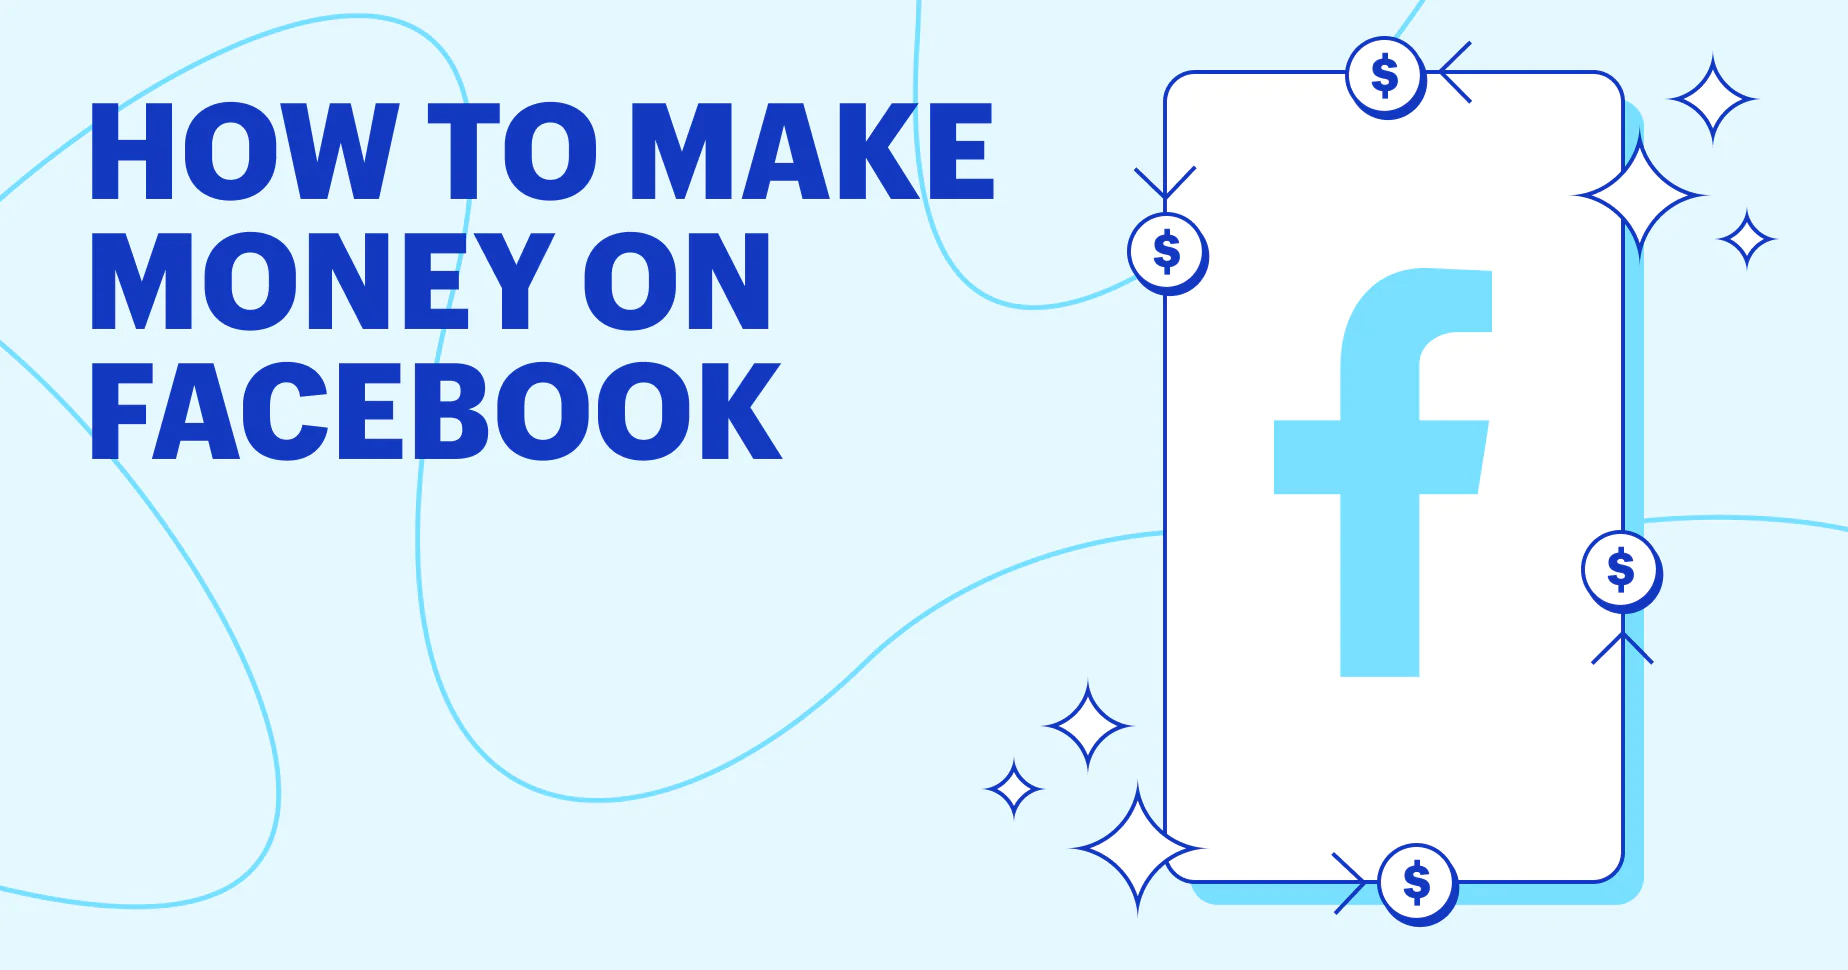 How to make money using Facebook